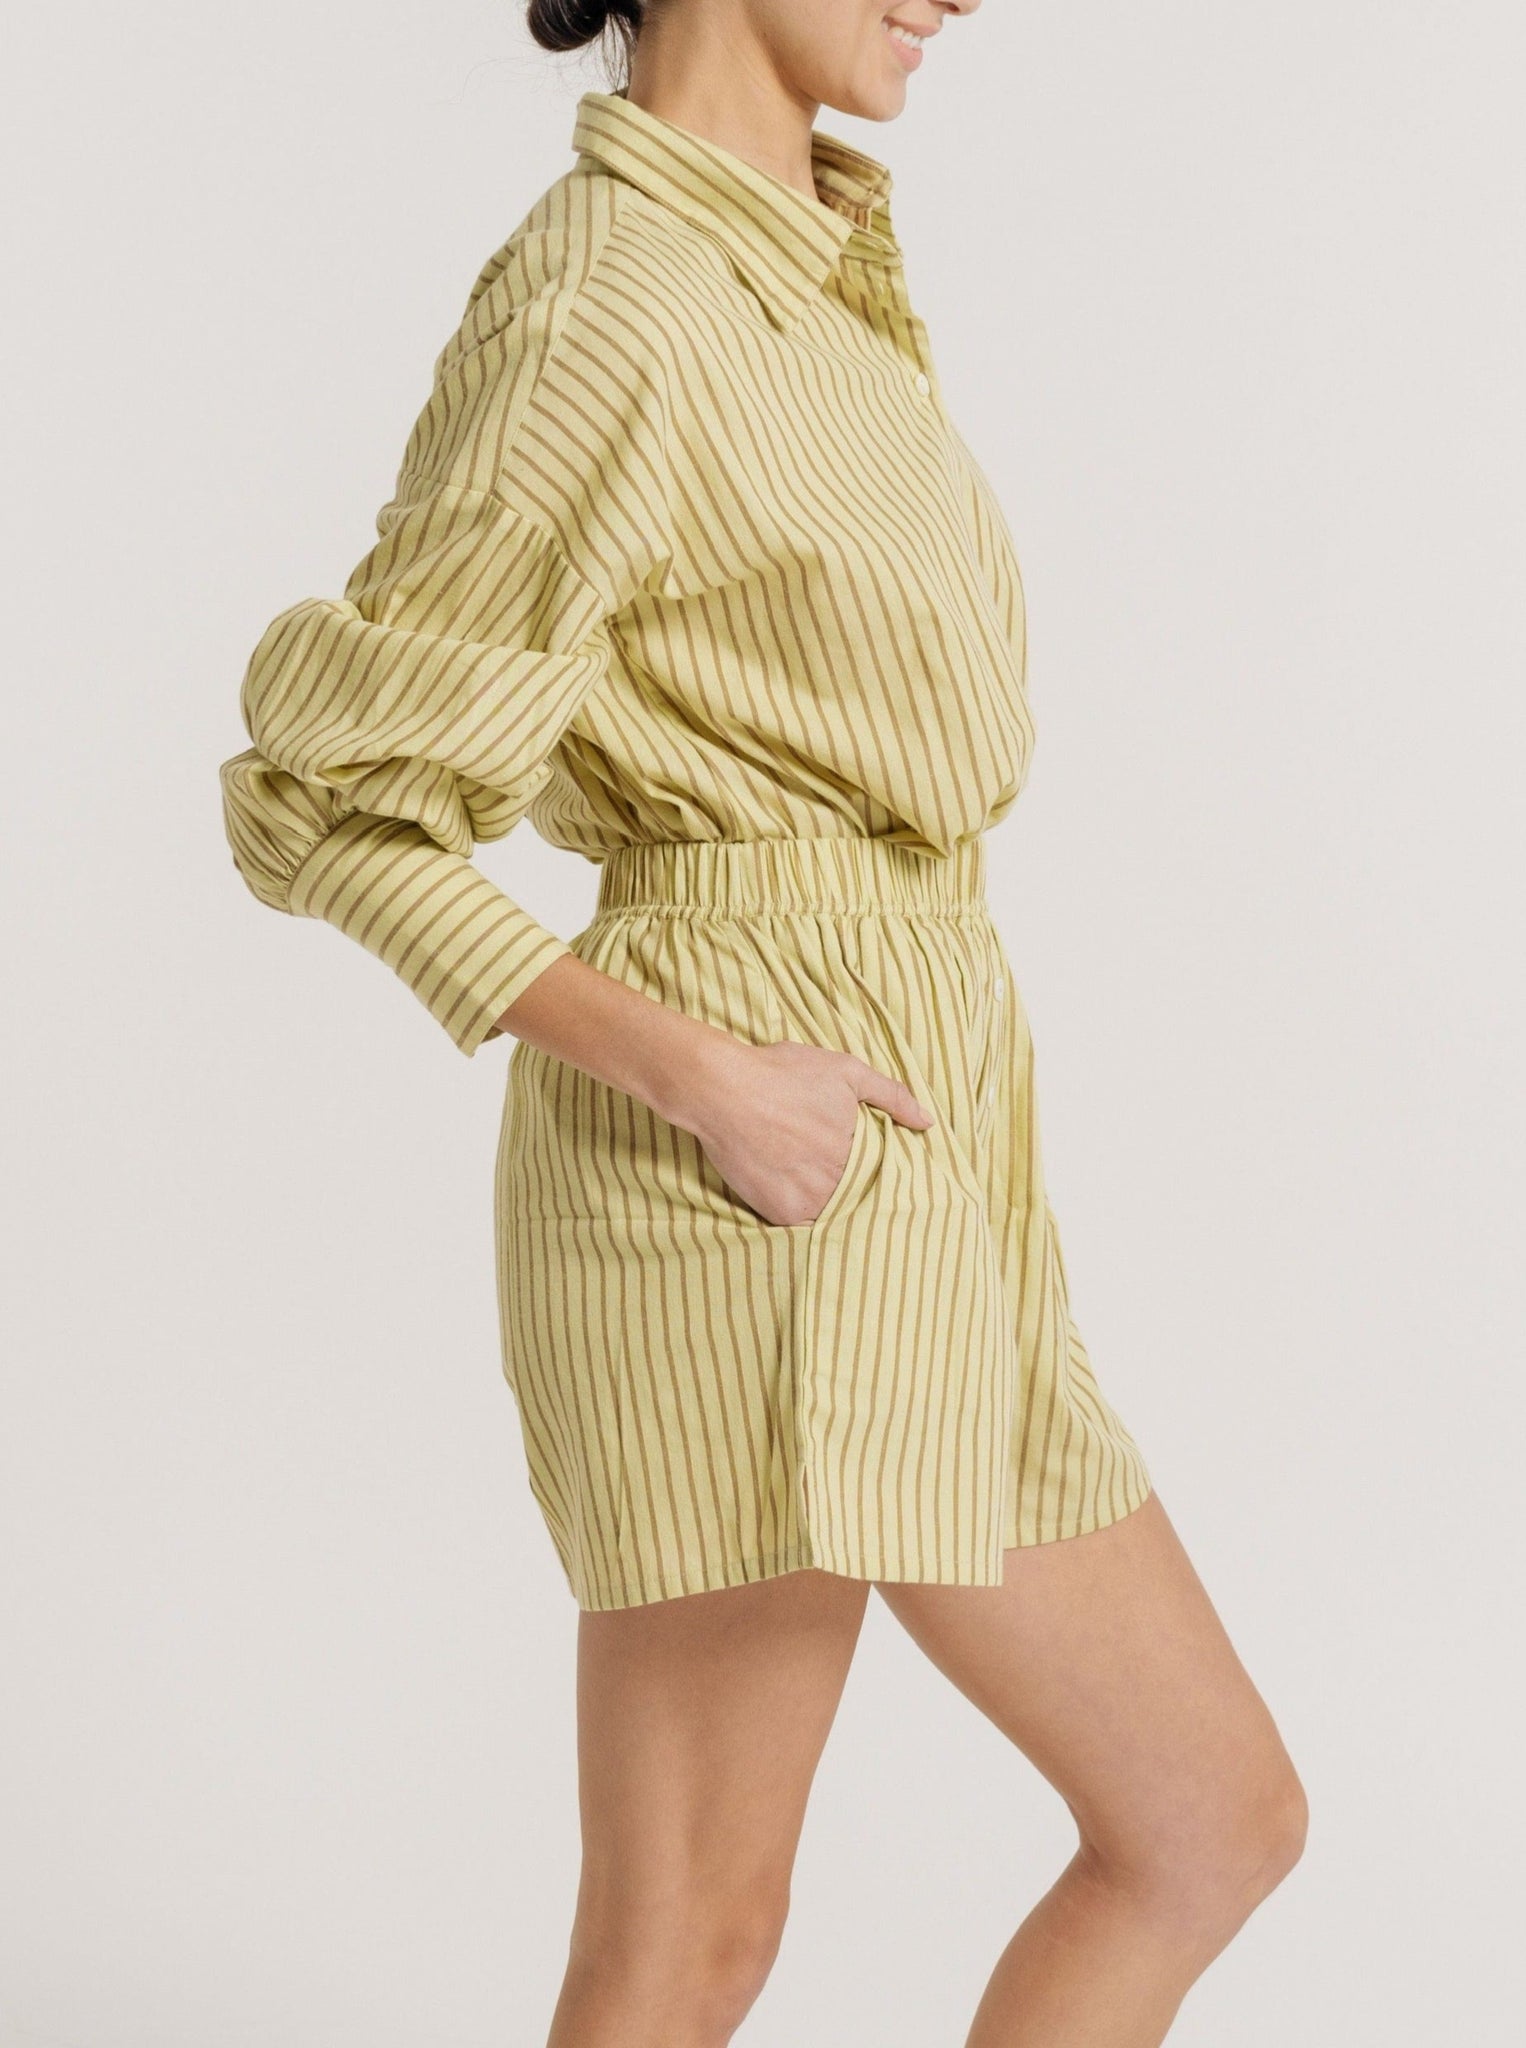 SEO product description: The Easy Short - Feather Grass Stripe - Sample is wearing a yellow striped romper.